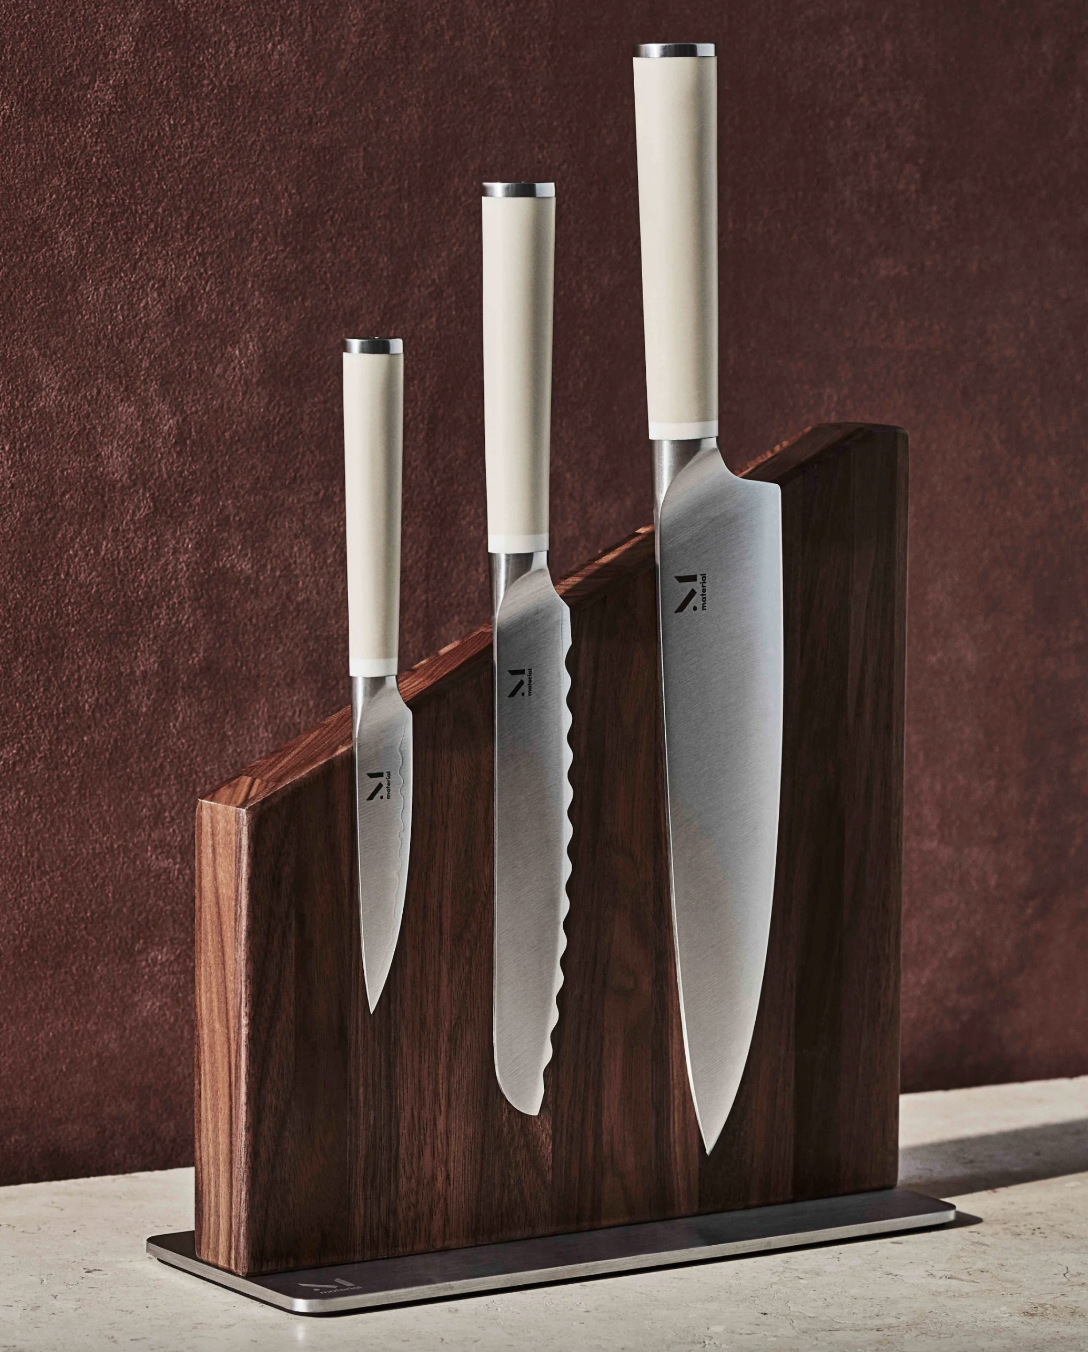 image of the knives in their wooden holder